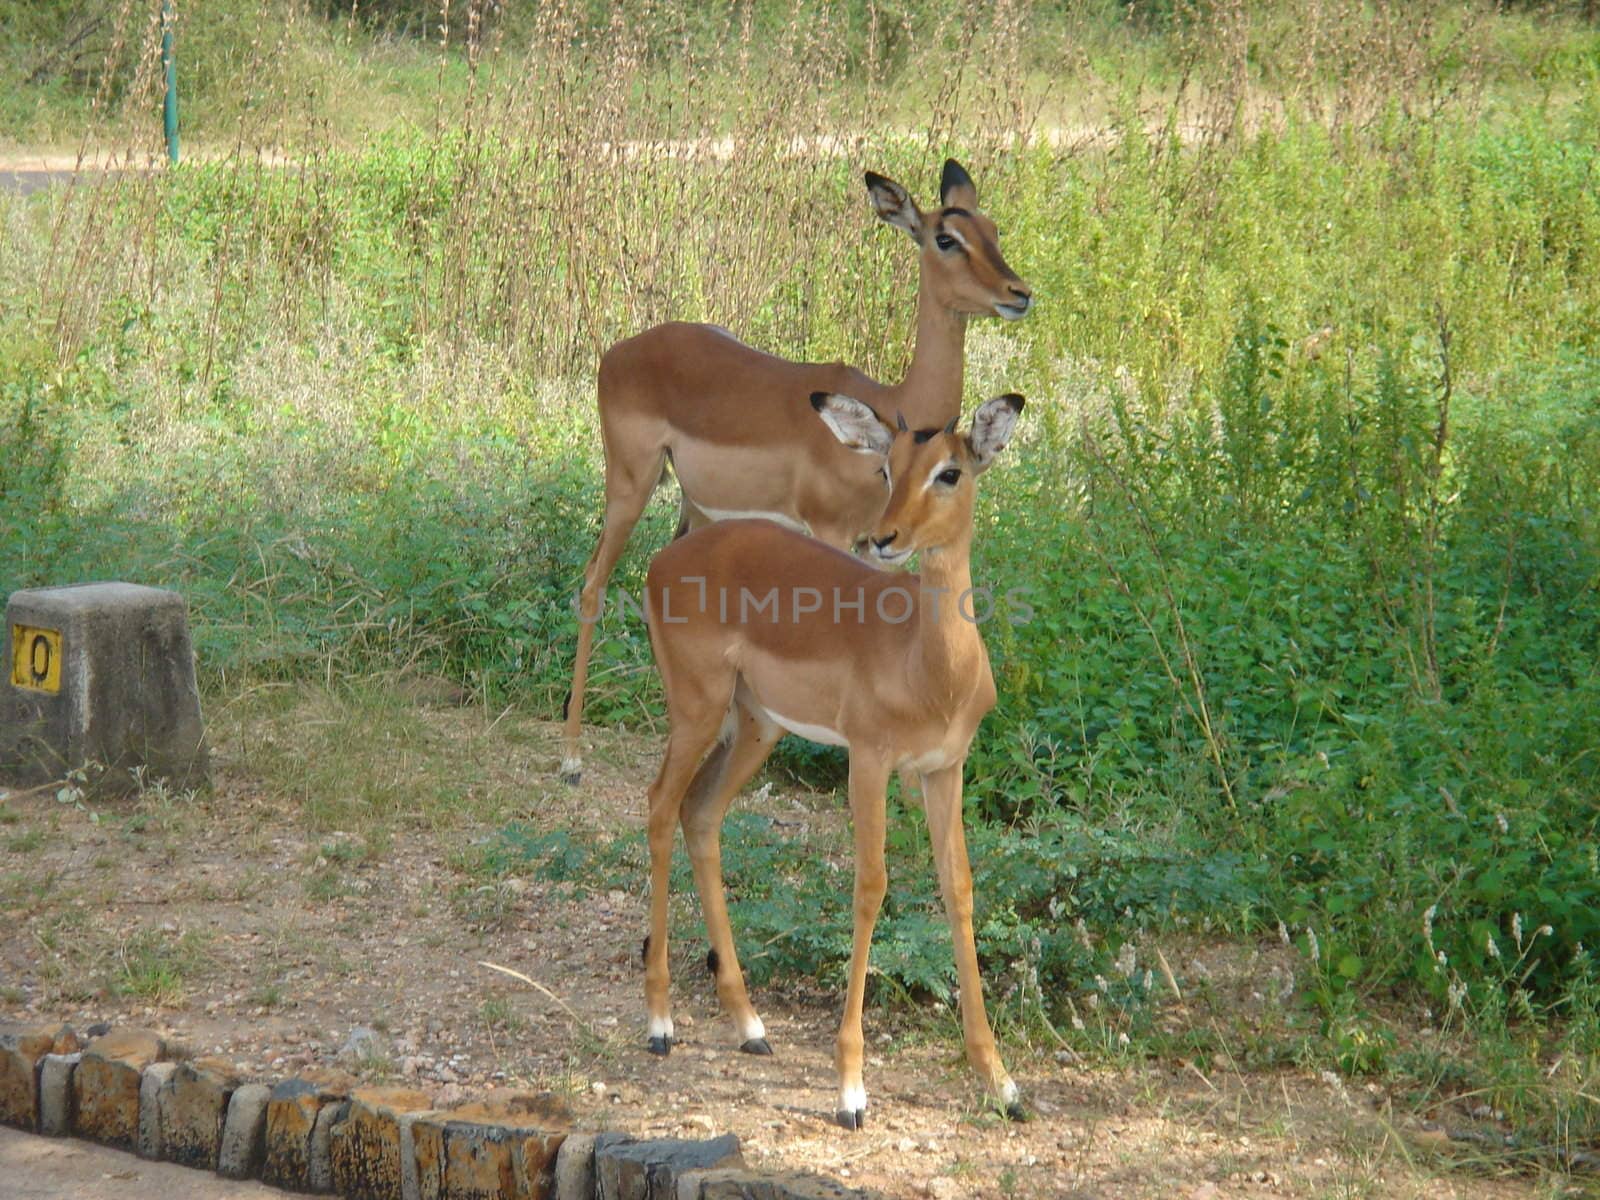 deers or bambis on a wild landscape in Kruger park, South Africa